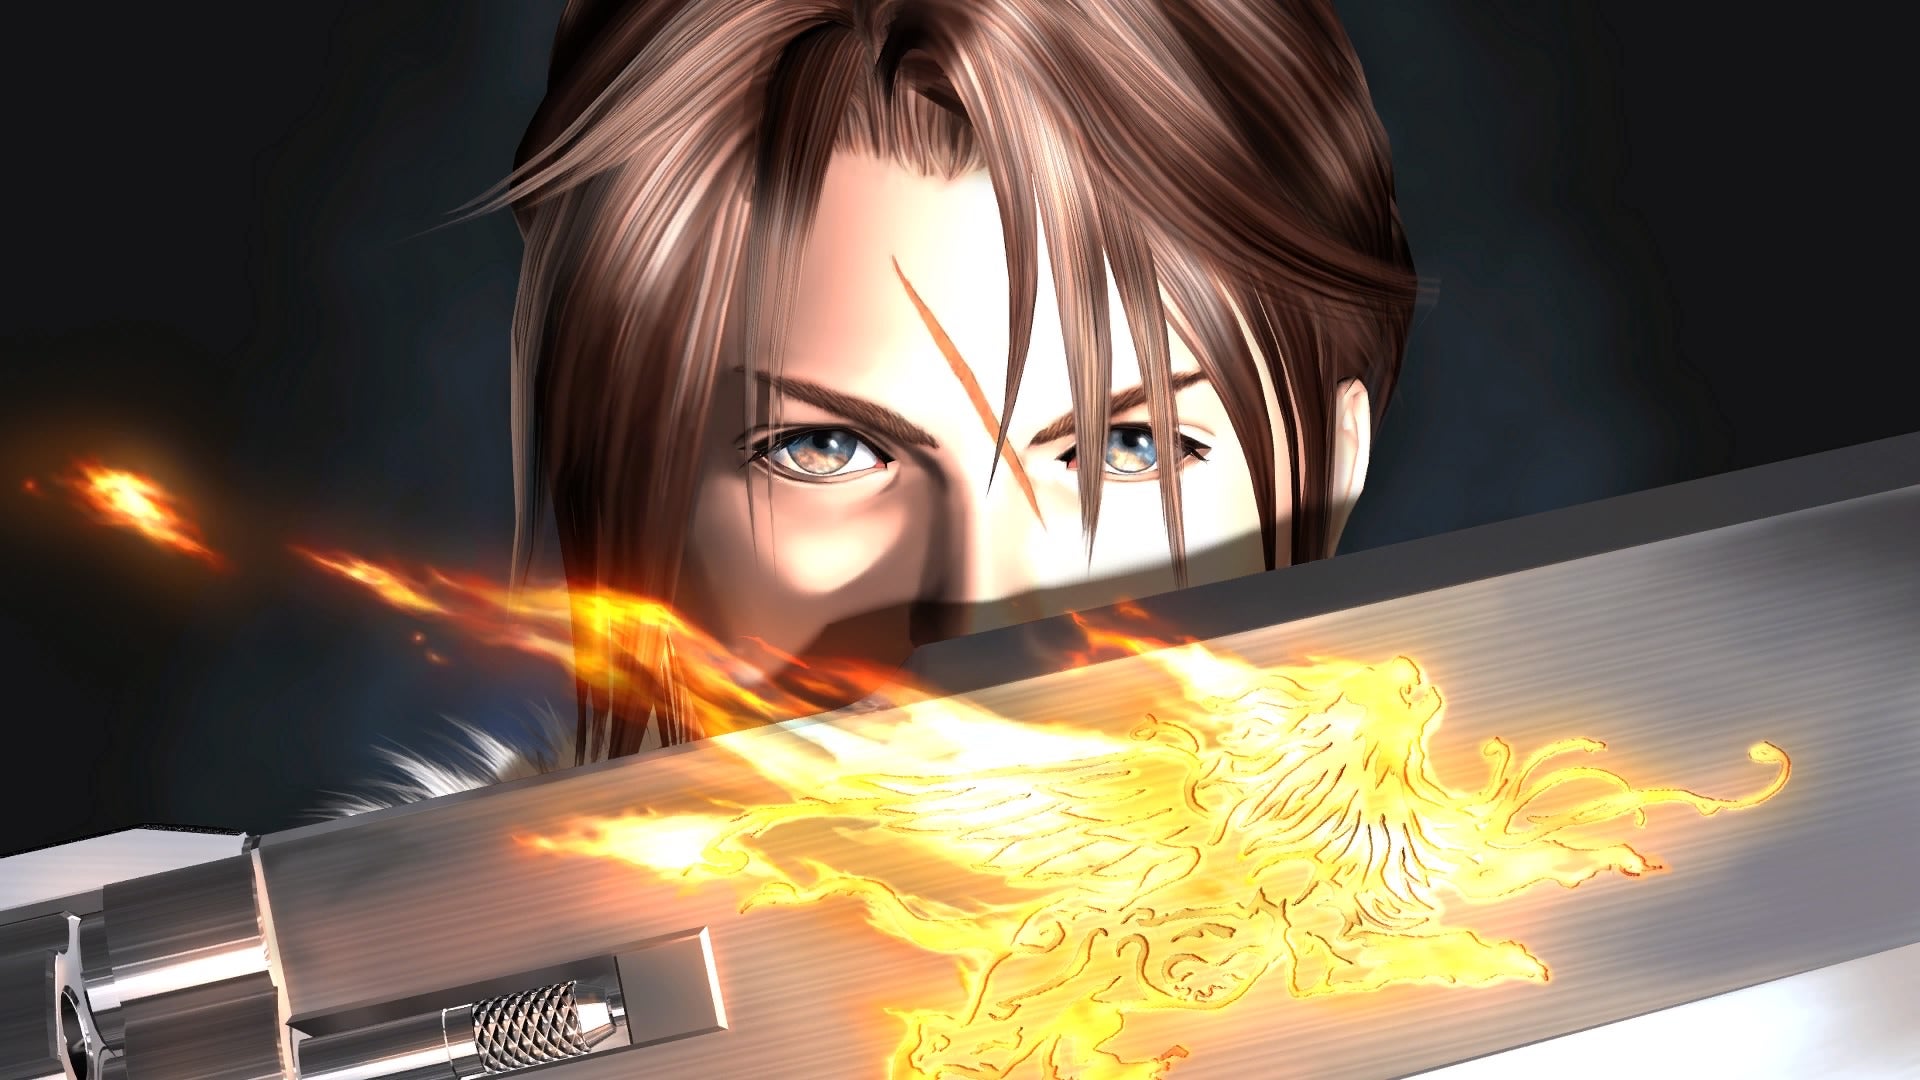 Artwork of Squall Leonhart holding his gunblade from Final Fantasy VIII